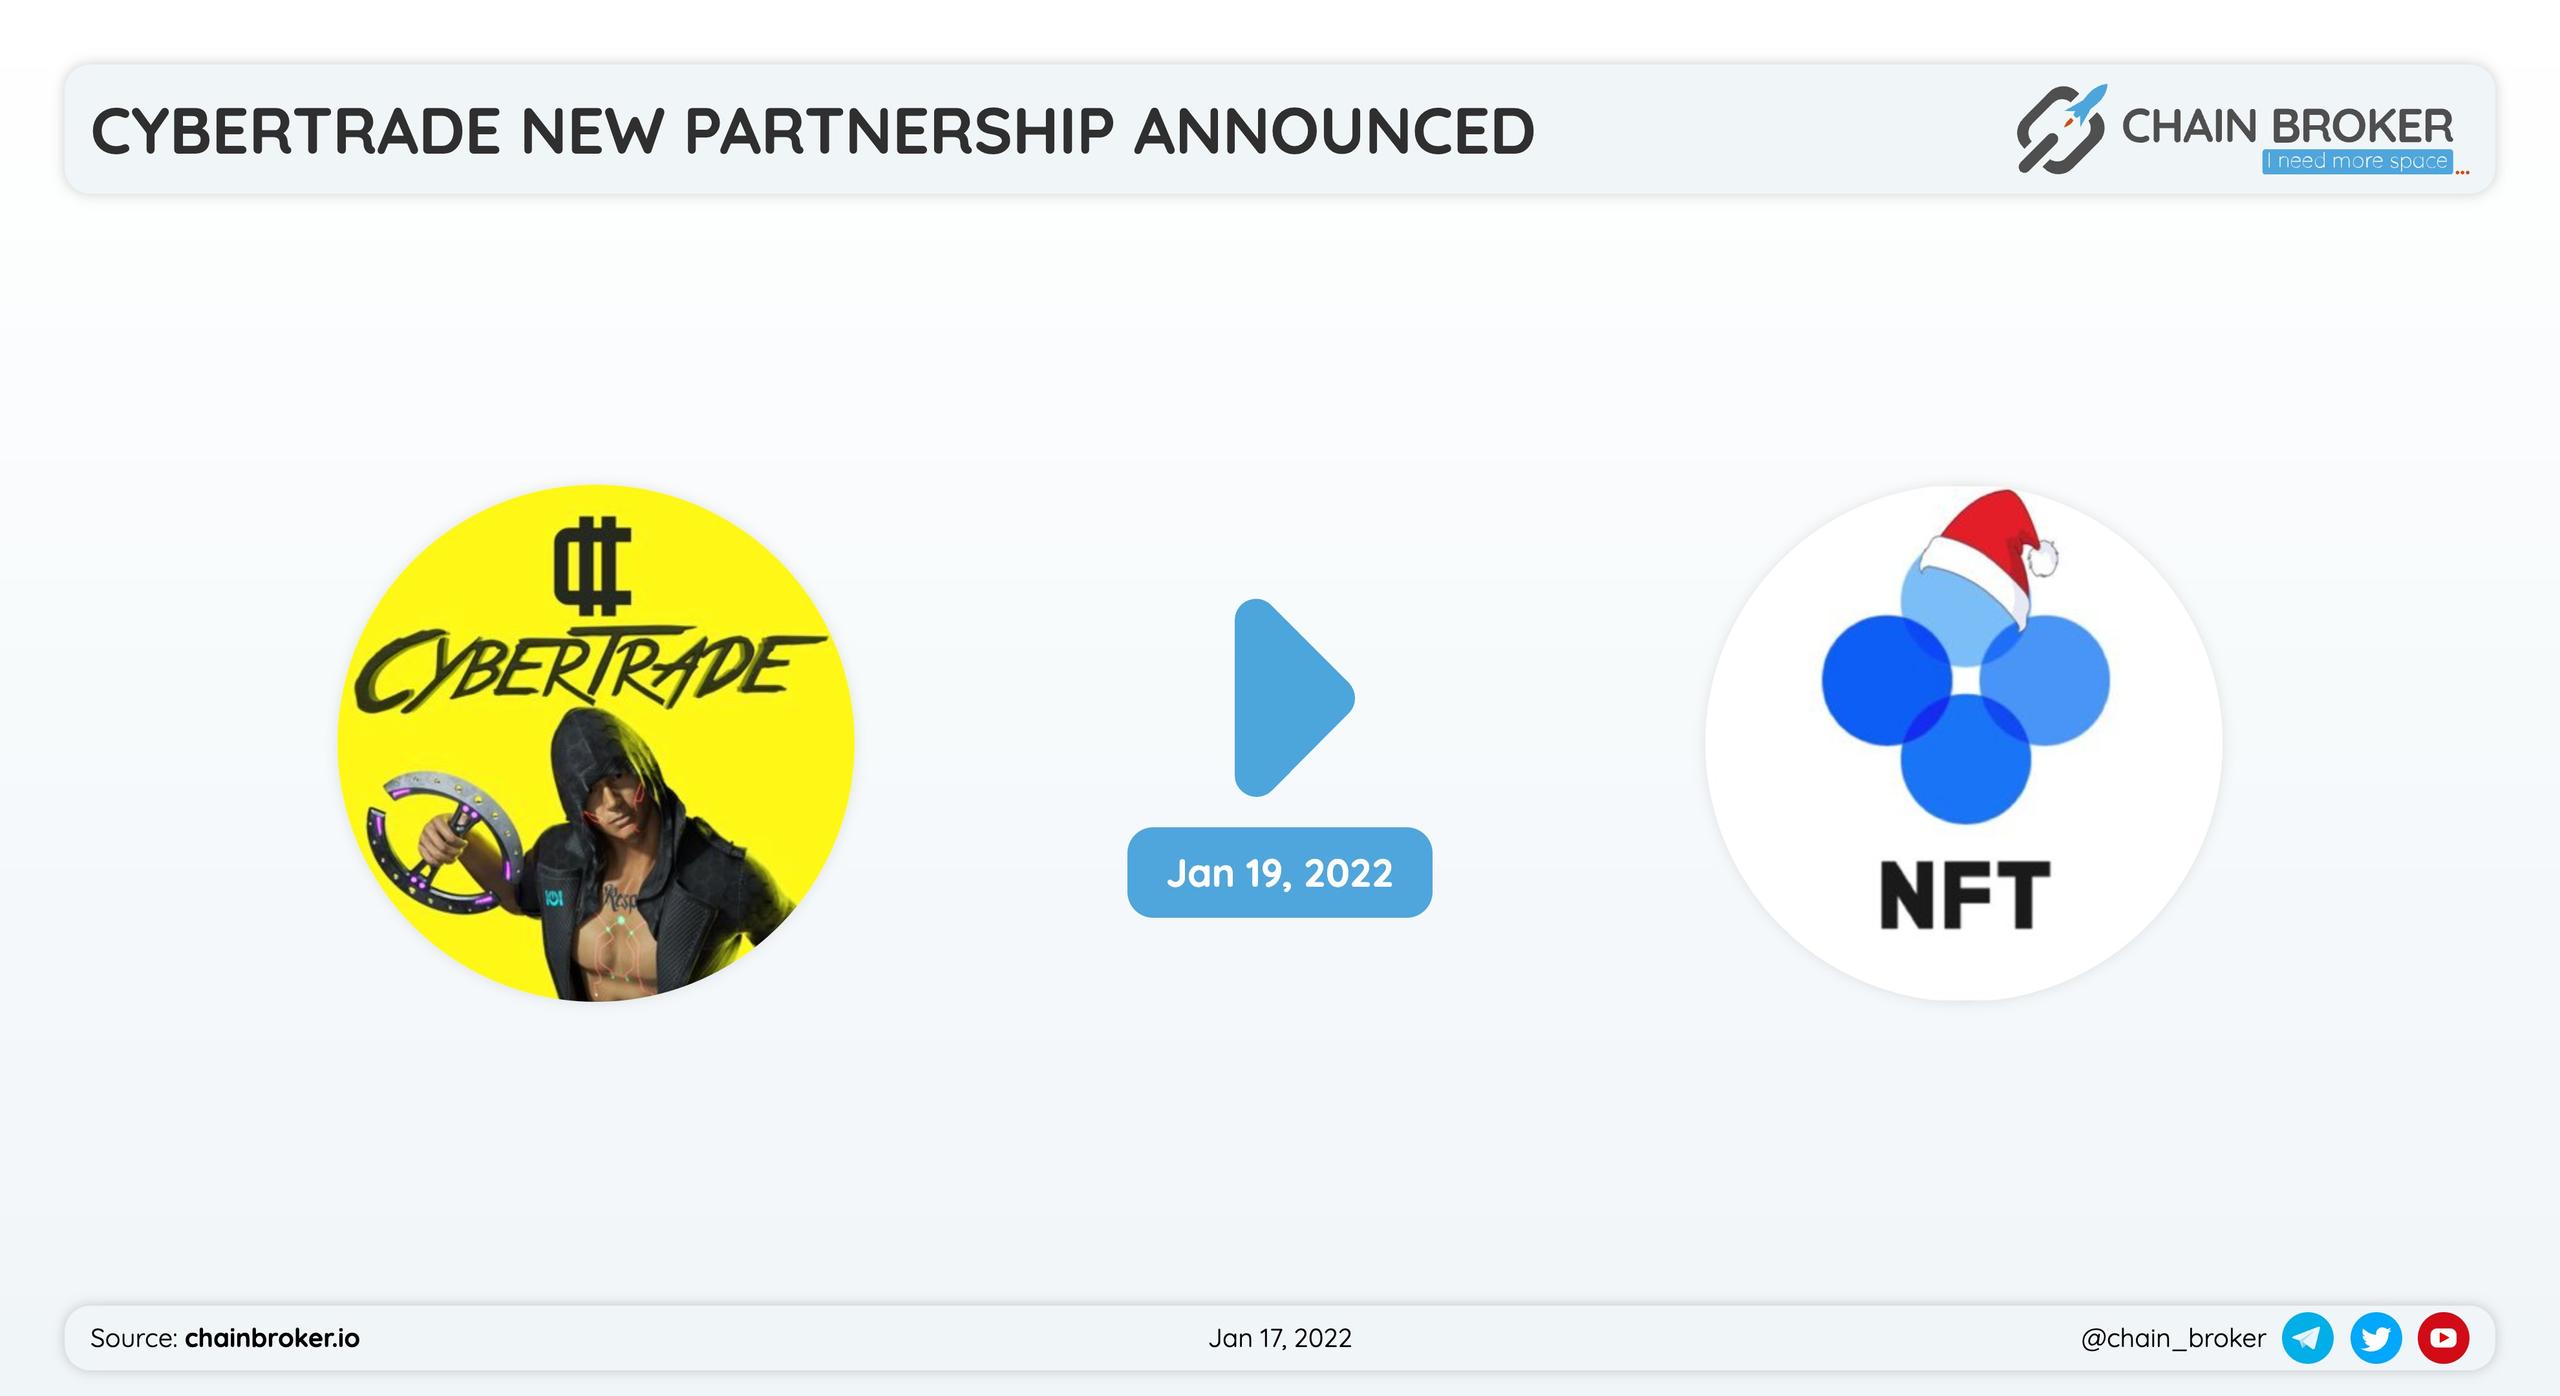 CyberTrade has partnered with OKEx for an NFT Sale.